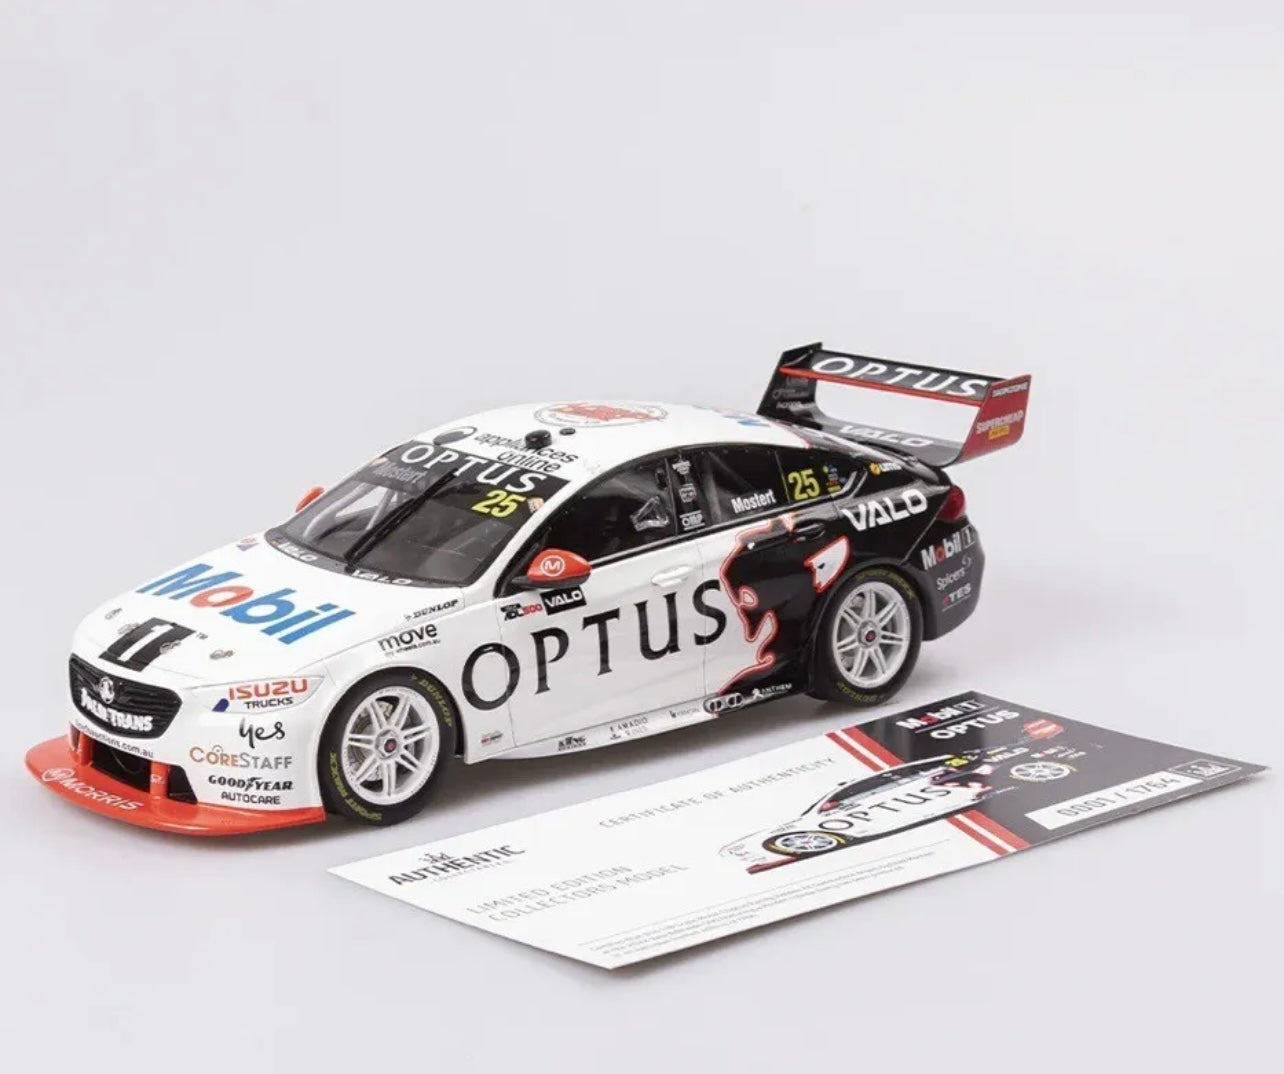 1:18 Chaz Mostert #25 2022 Valo Adelaide 5000 Holden Tribute Livery Mobil 1 Optus Racing